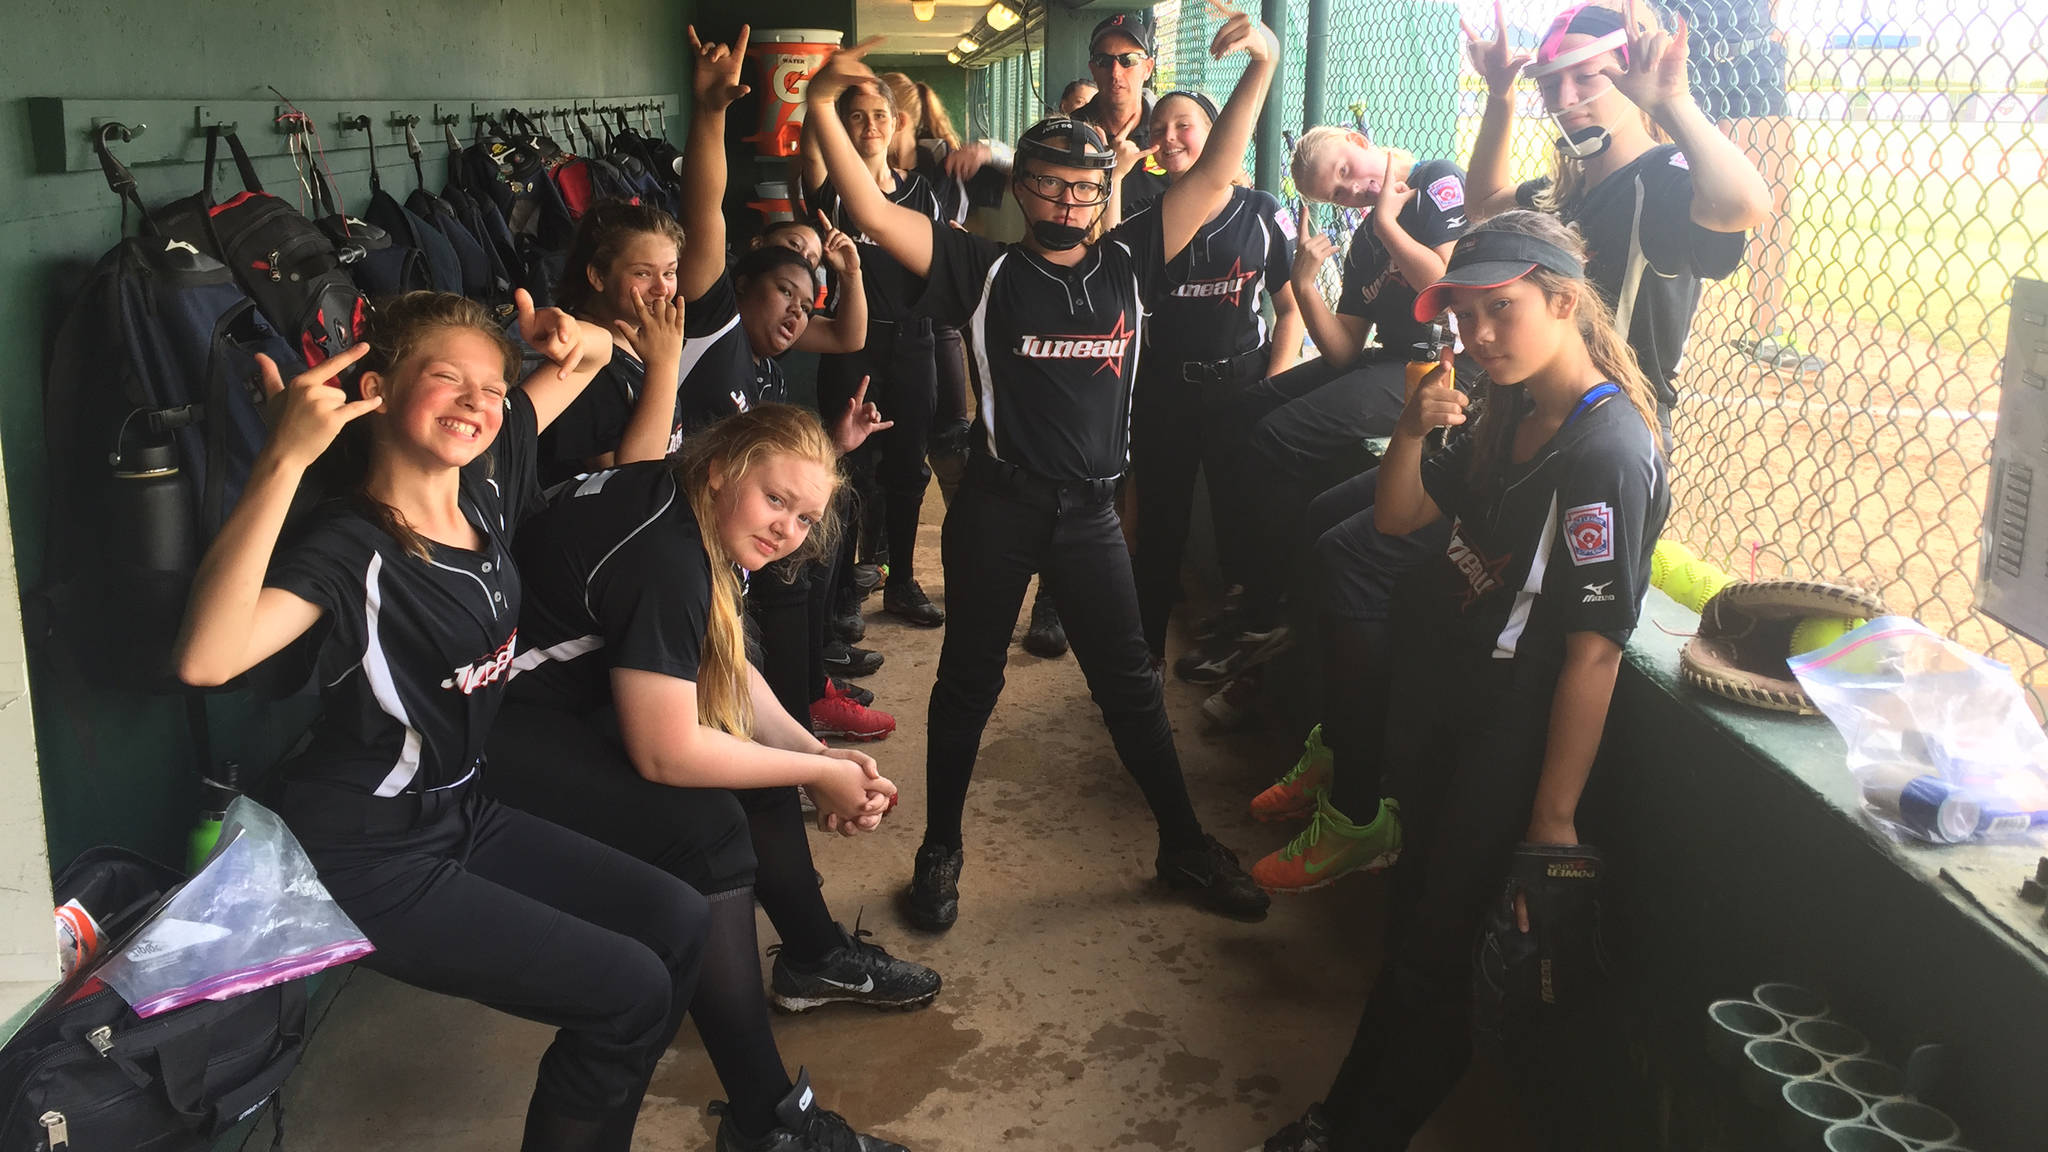 The Gastineau Channel Little League Major Softball All-Stars show their game faces prior to playing Montana on Tuesday at the Little League West Regional Tournament in San Bernardino, California. The Juneau team defeated Montana 2-1 to stay alive in the tournament. (Photo courtesy of Ethan Billings)